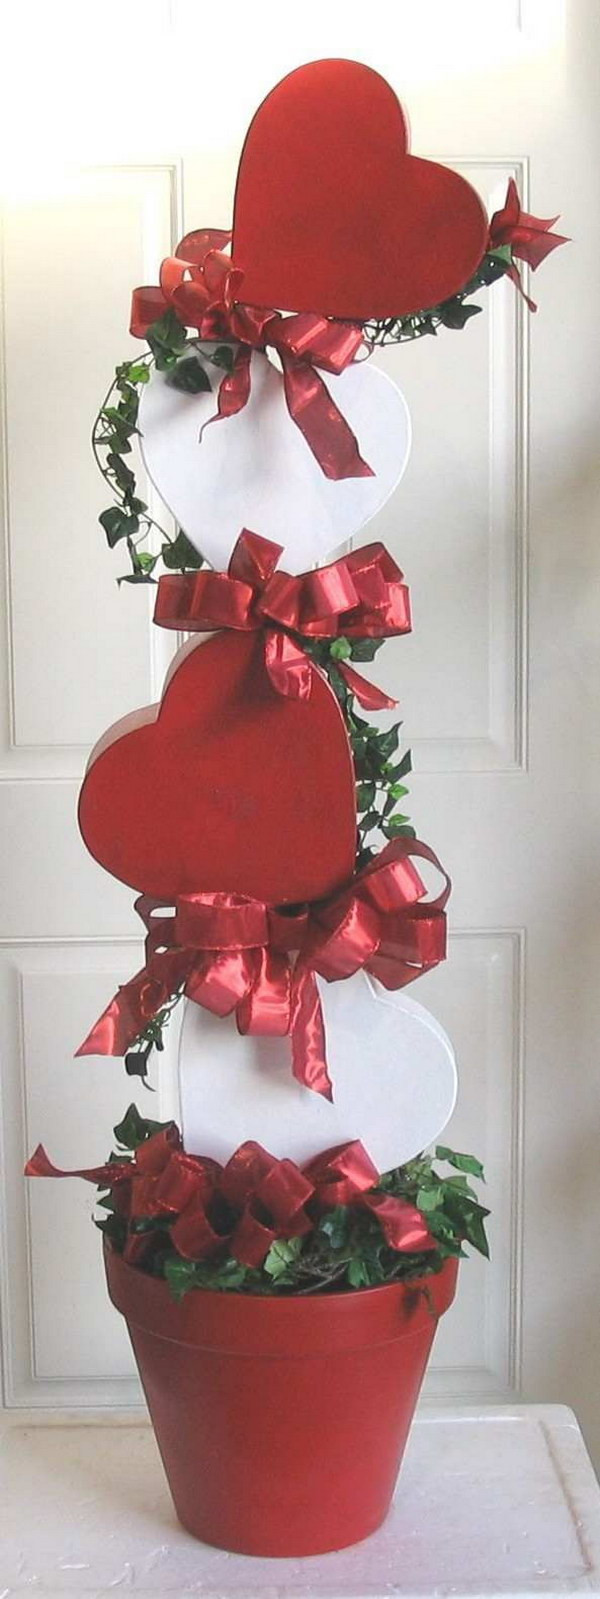 DIY Valentines Day Decorations
 30 Best Ideas For Valentines Day Hative